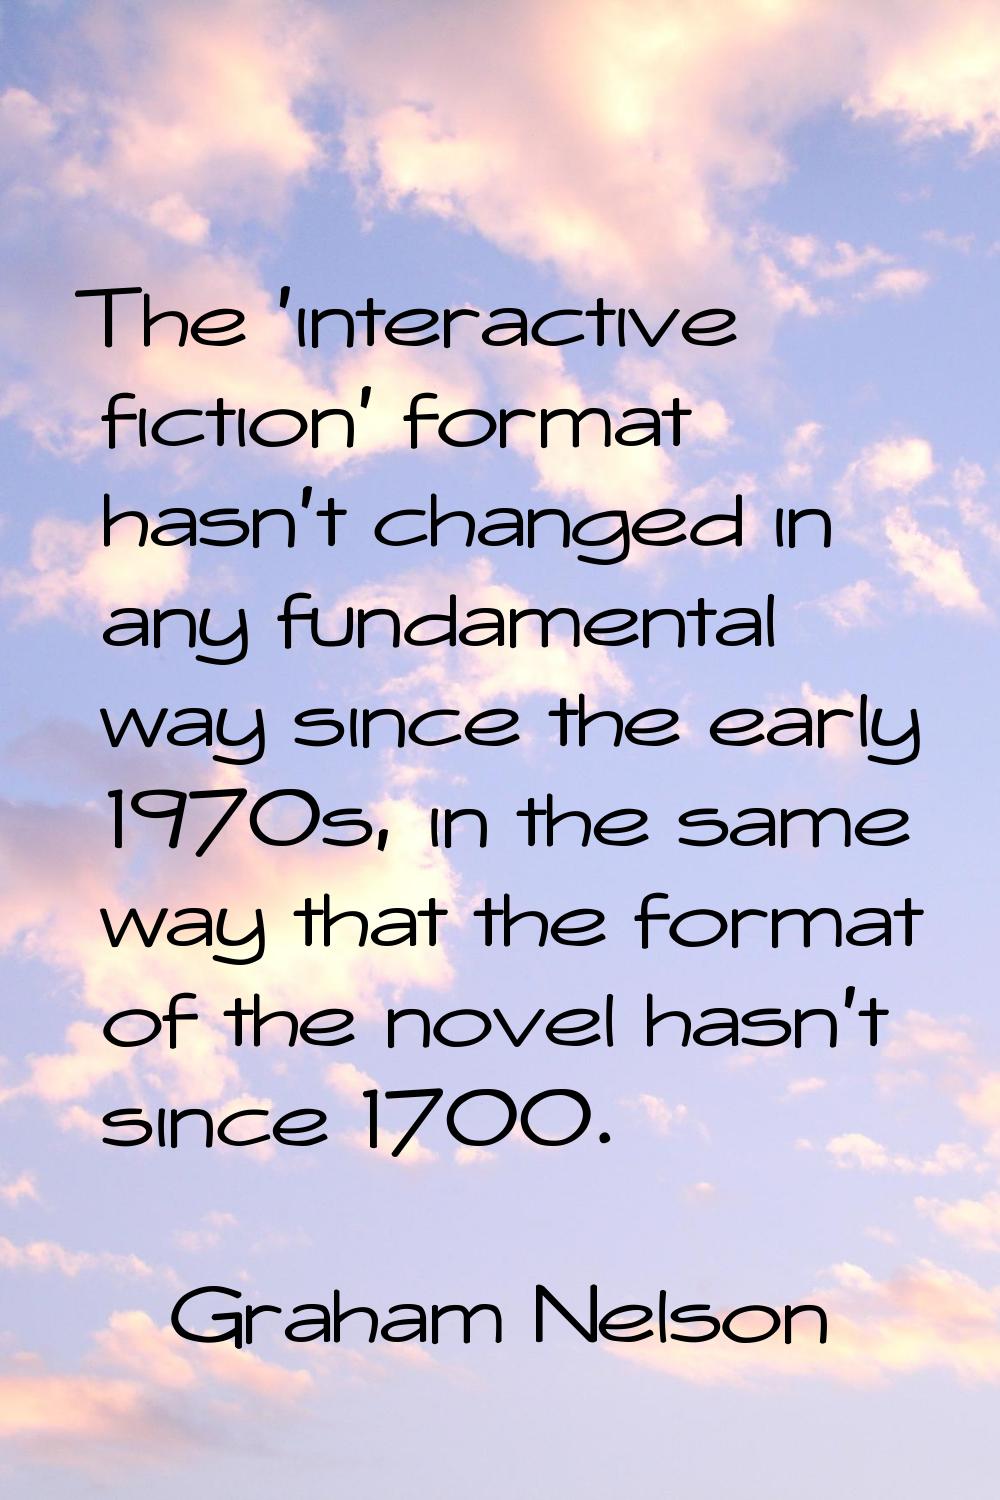 The 'interactive fiction' format hasn't changed in any fundamental way since the early 1970s, in th